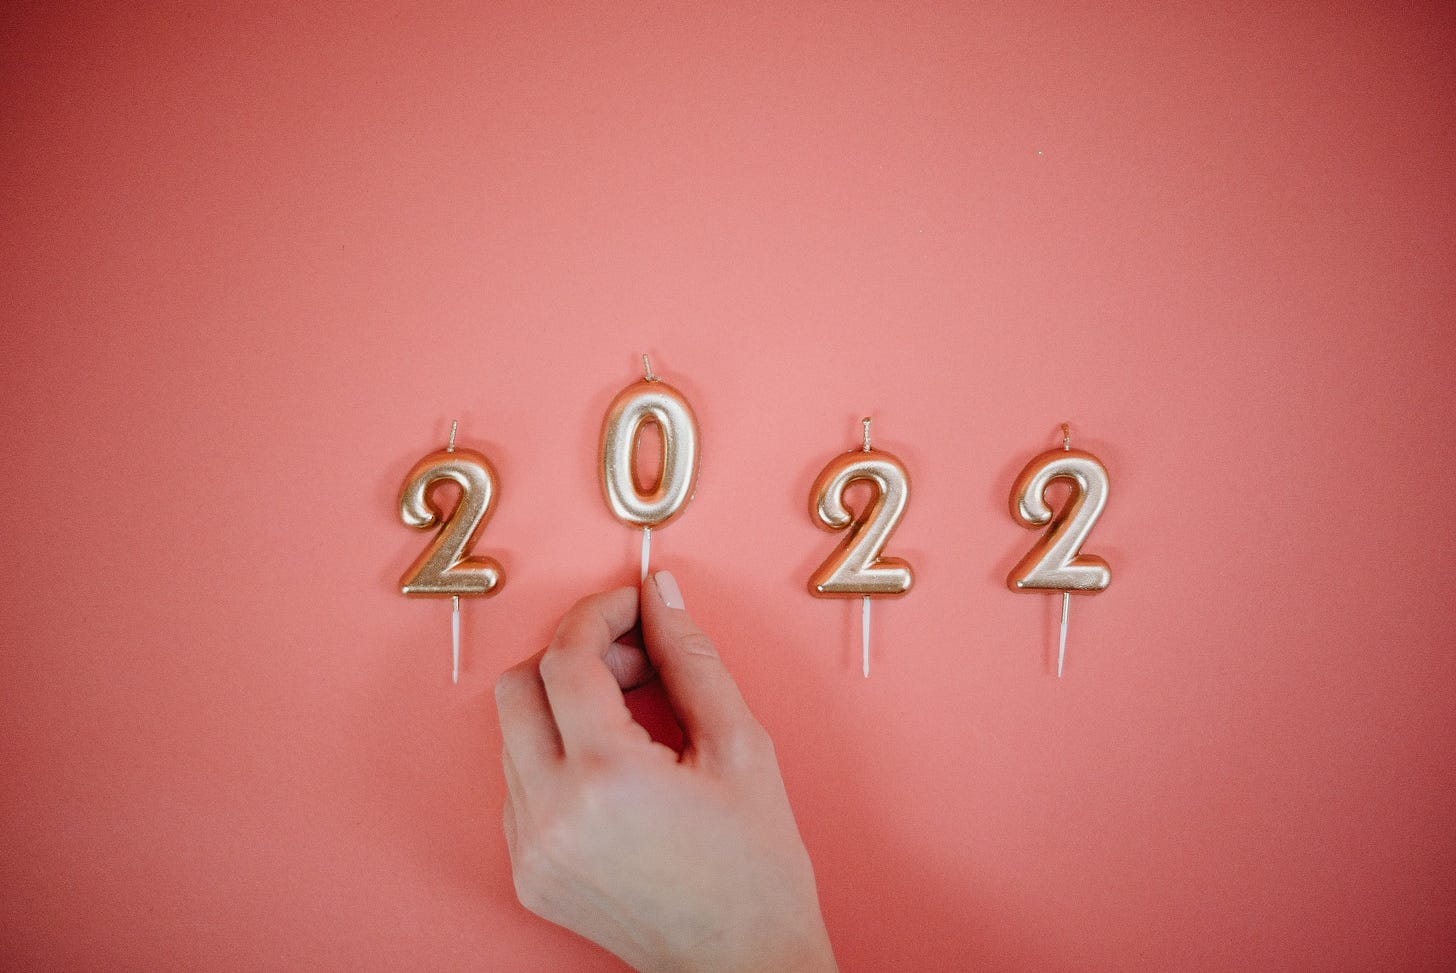 The year "2022" hanging on a red background.